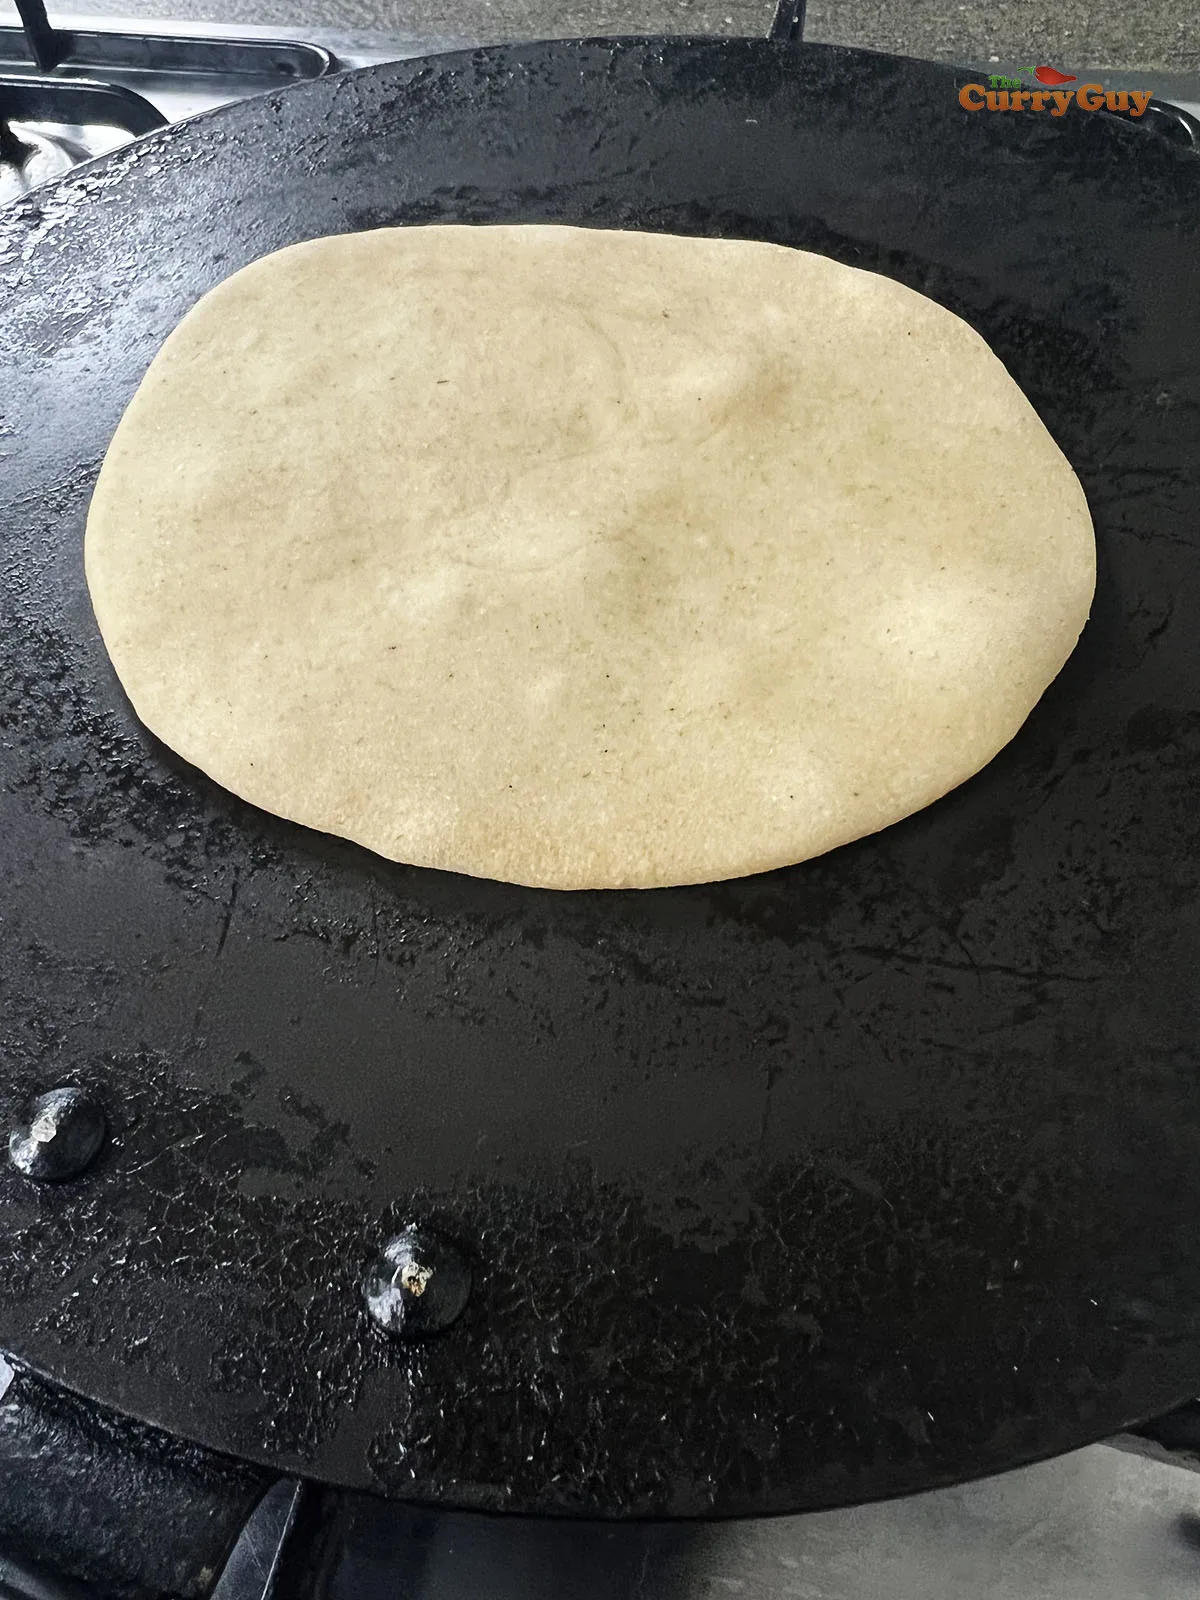 Chapati cooking with bubbles forming.